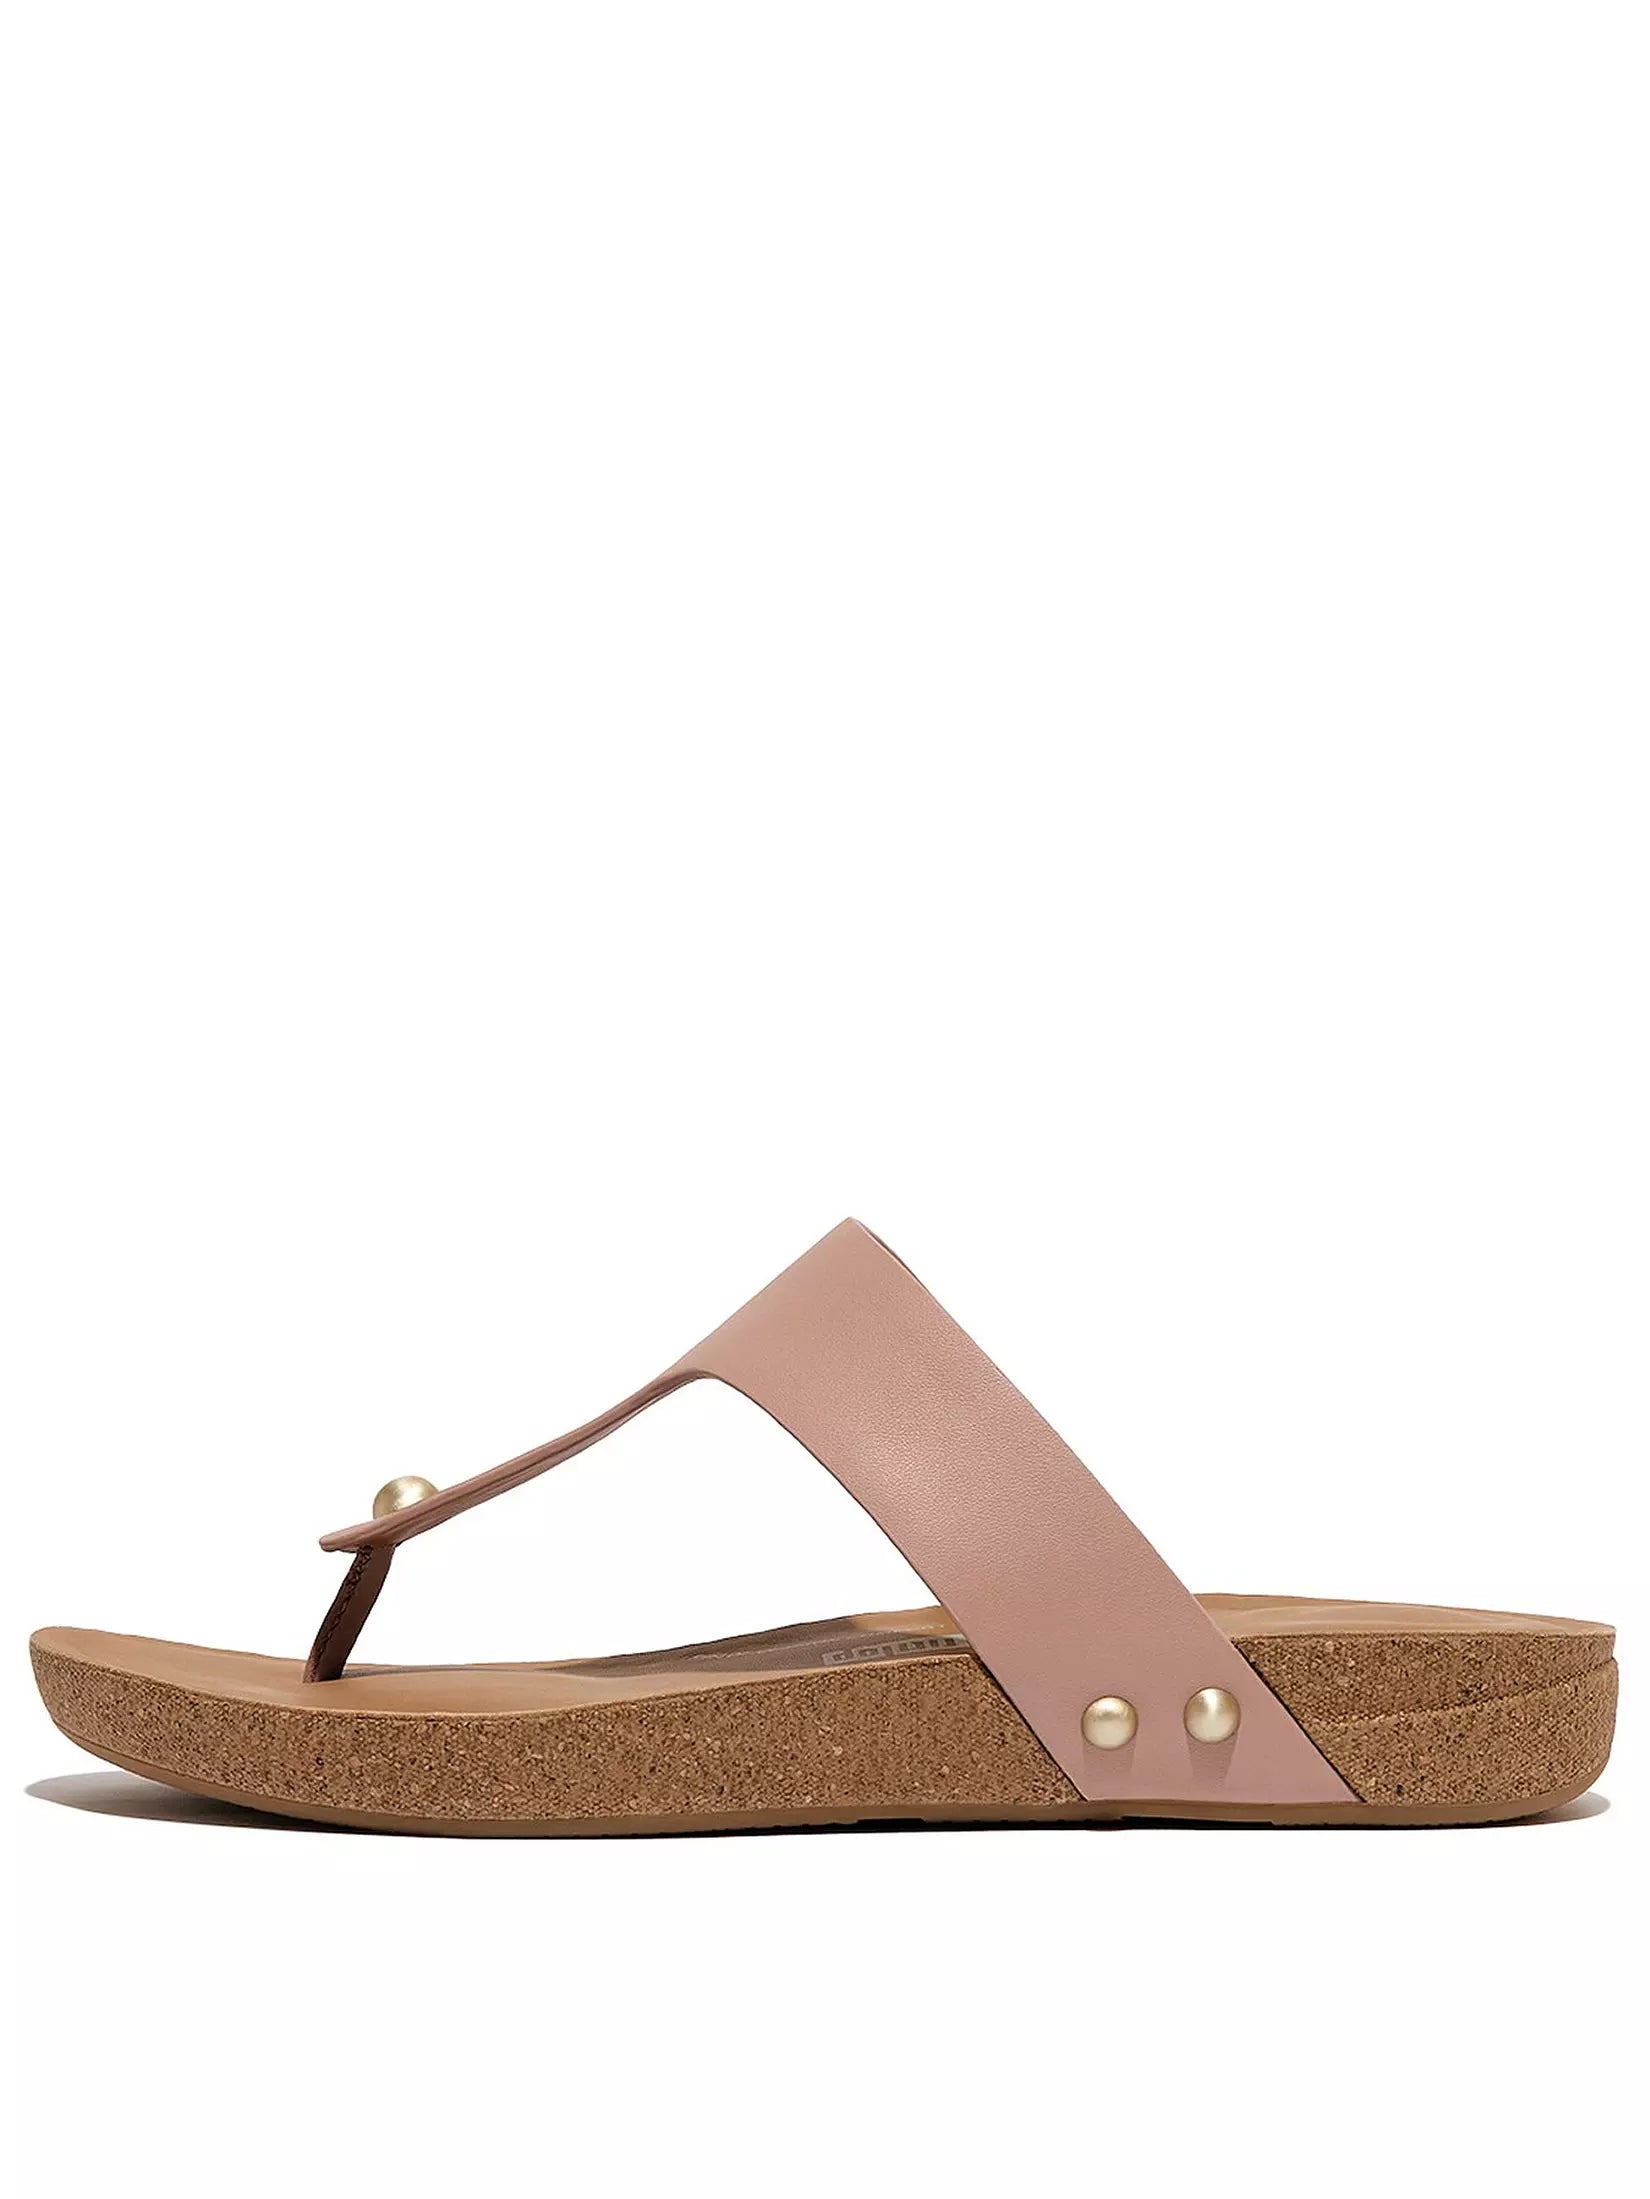 FitFlop FitFlop IQushion Leather Toe-Post Sandals Sandal Beige 4 